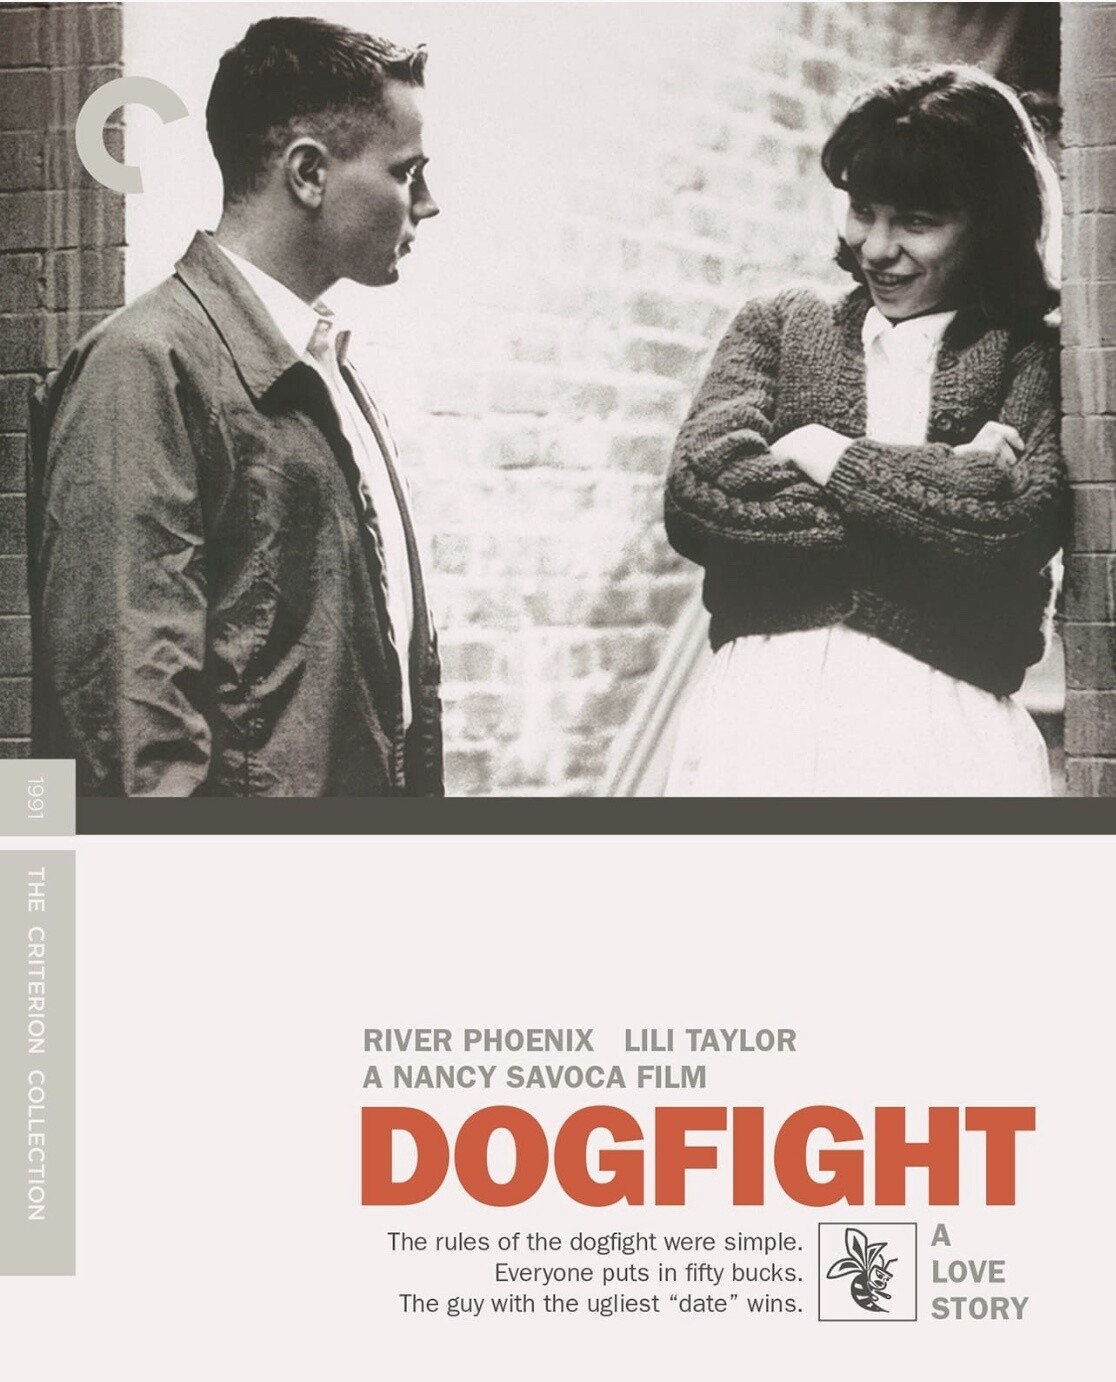 Dogfight (Blu-ray) ***Preorder*** 4/30